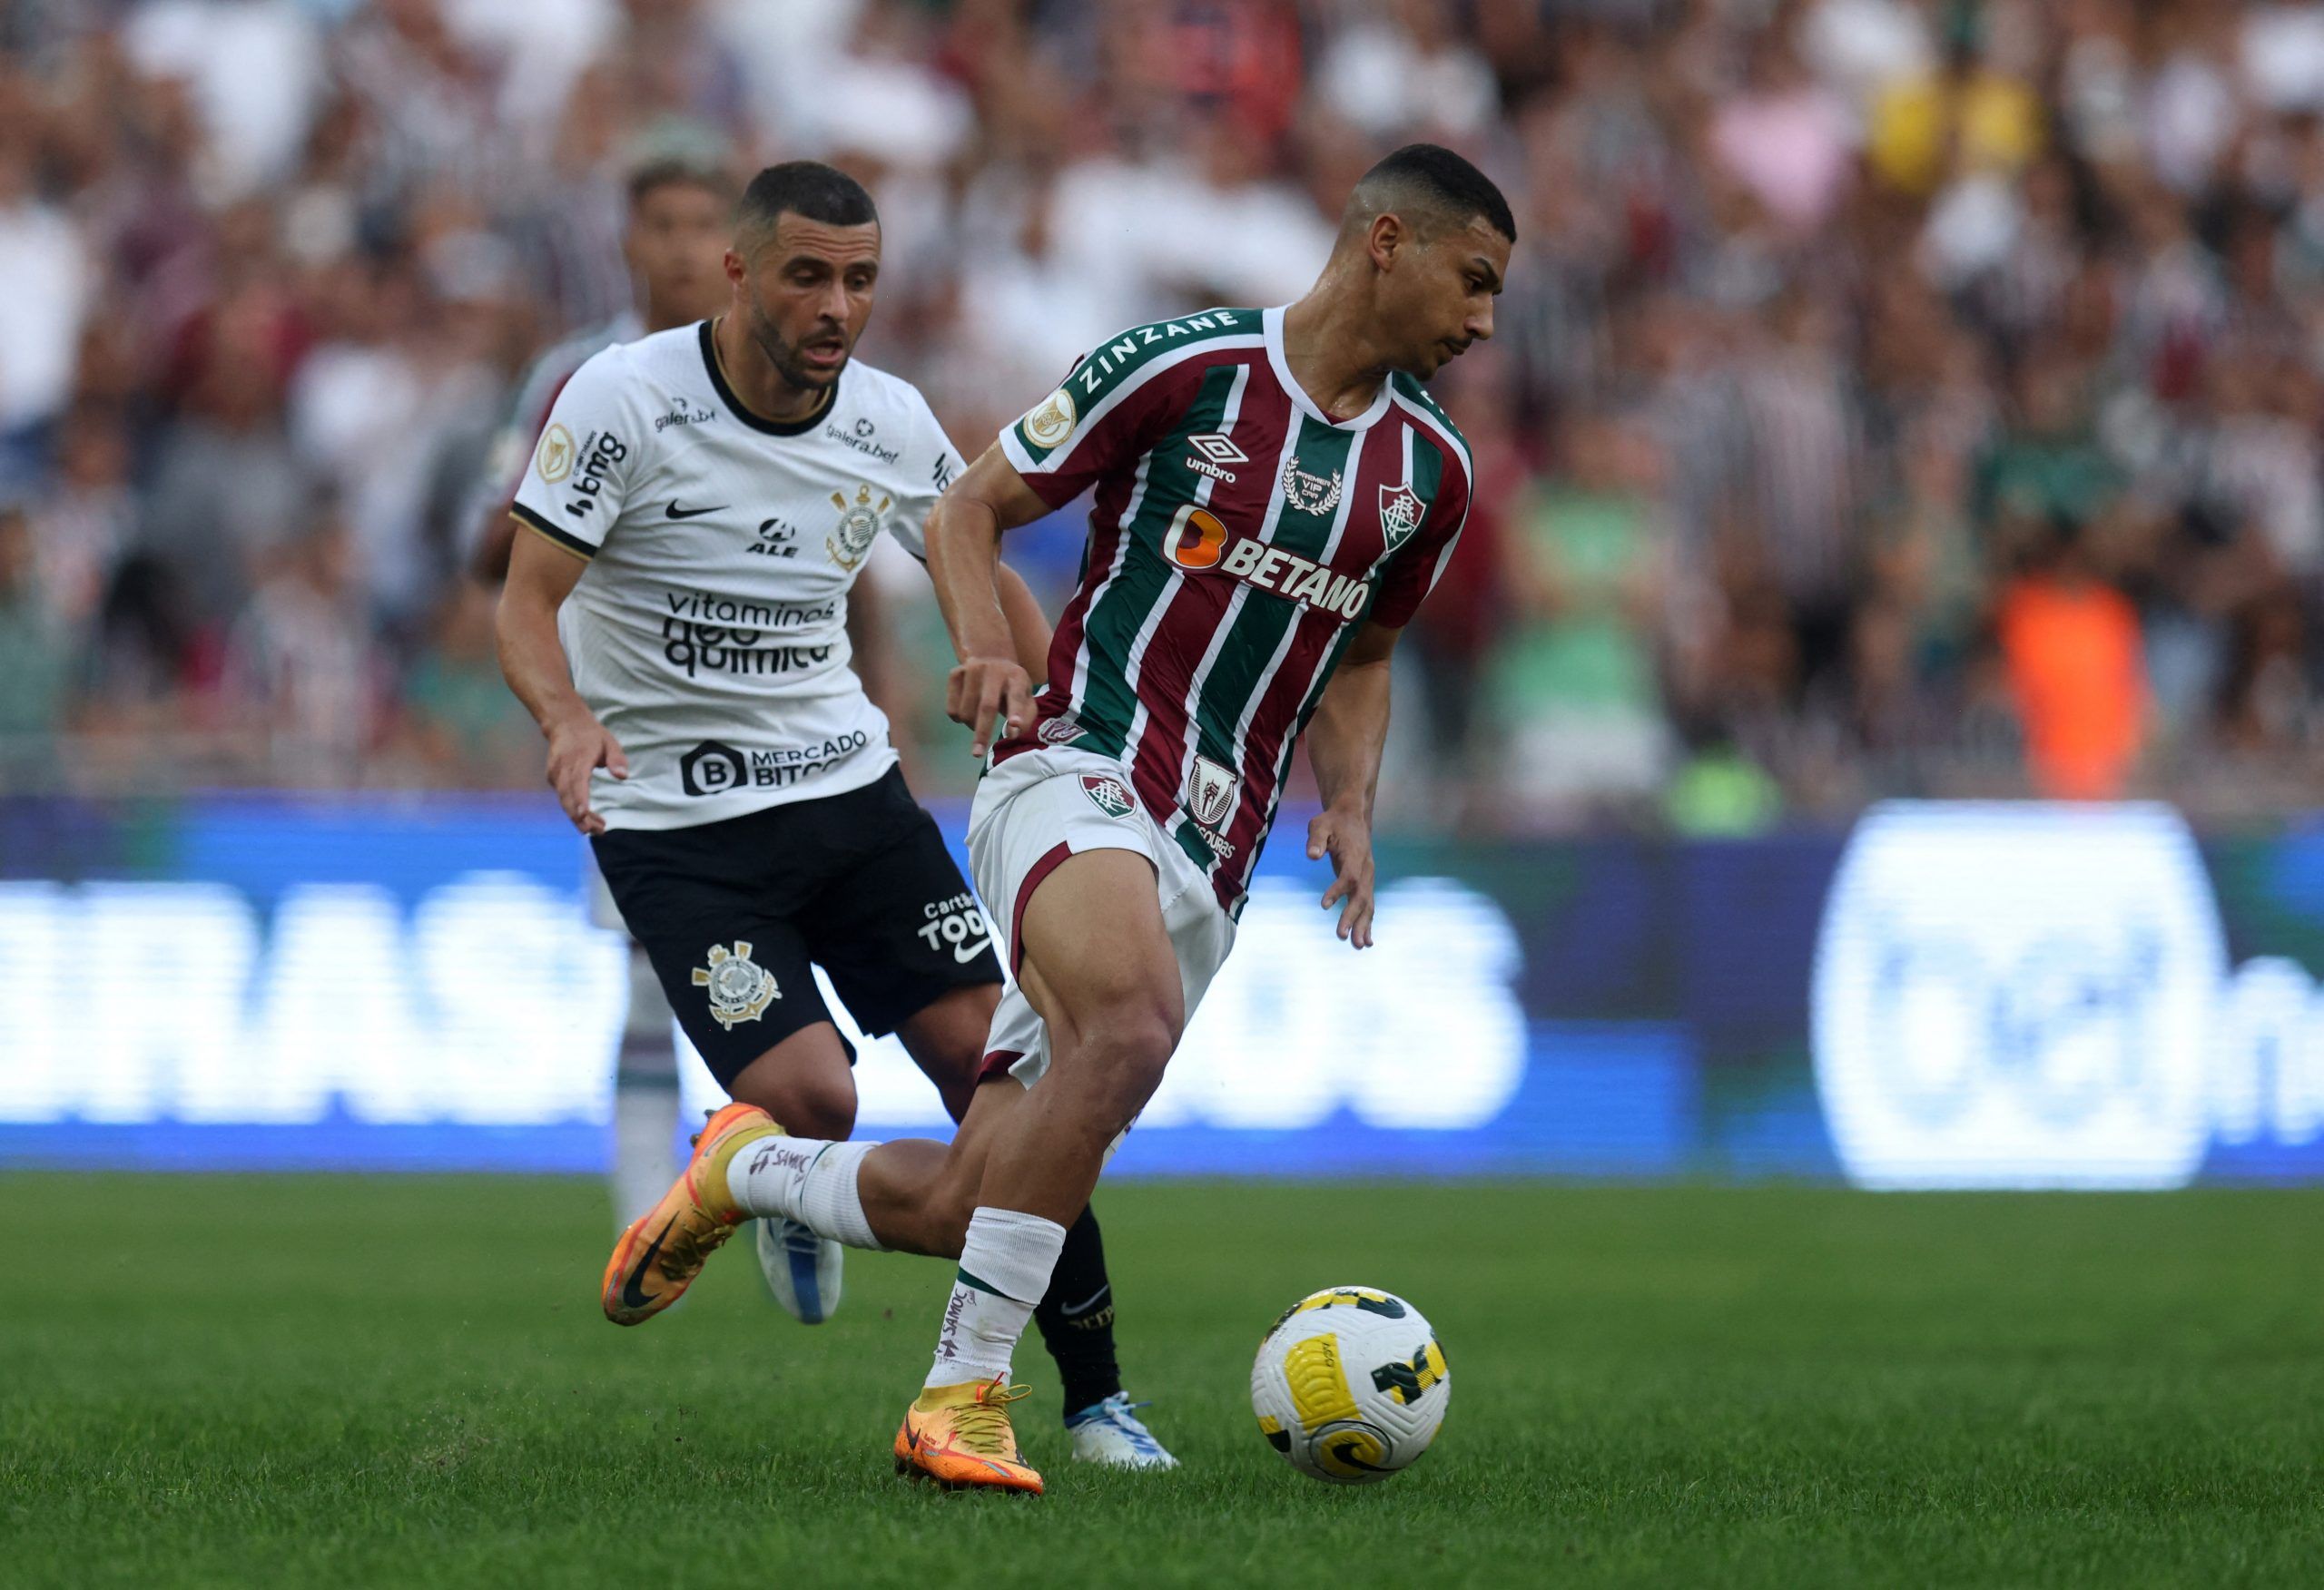 Fluminense's Andre in action with Corinthians' Moraes